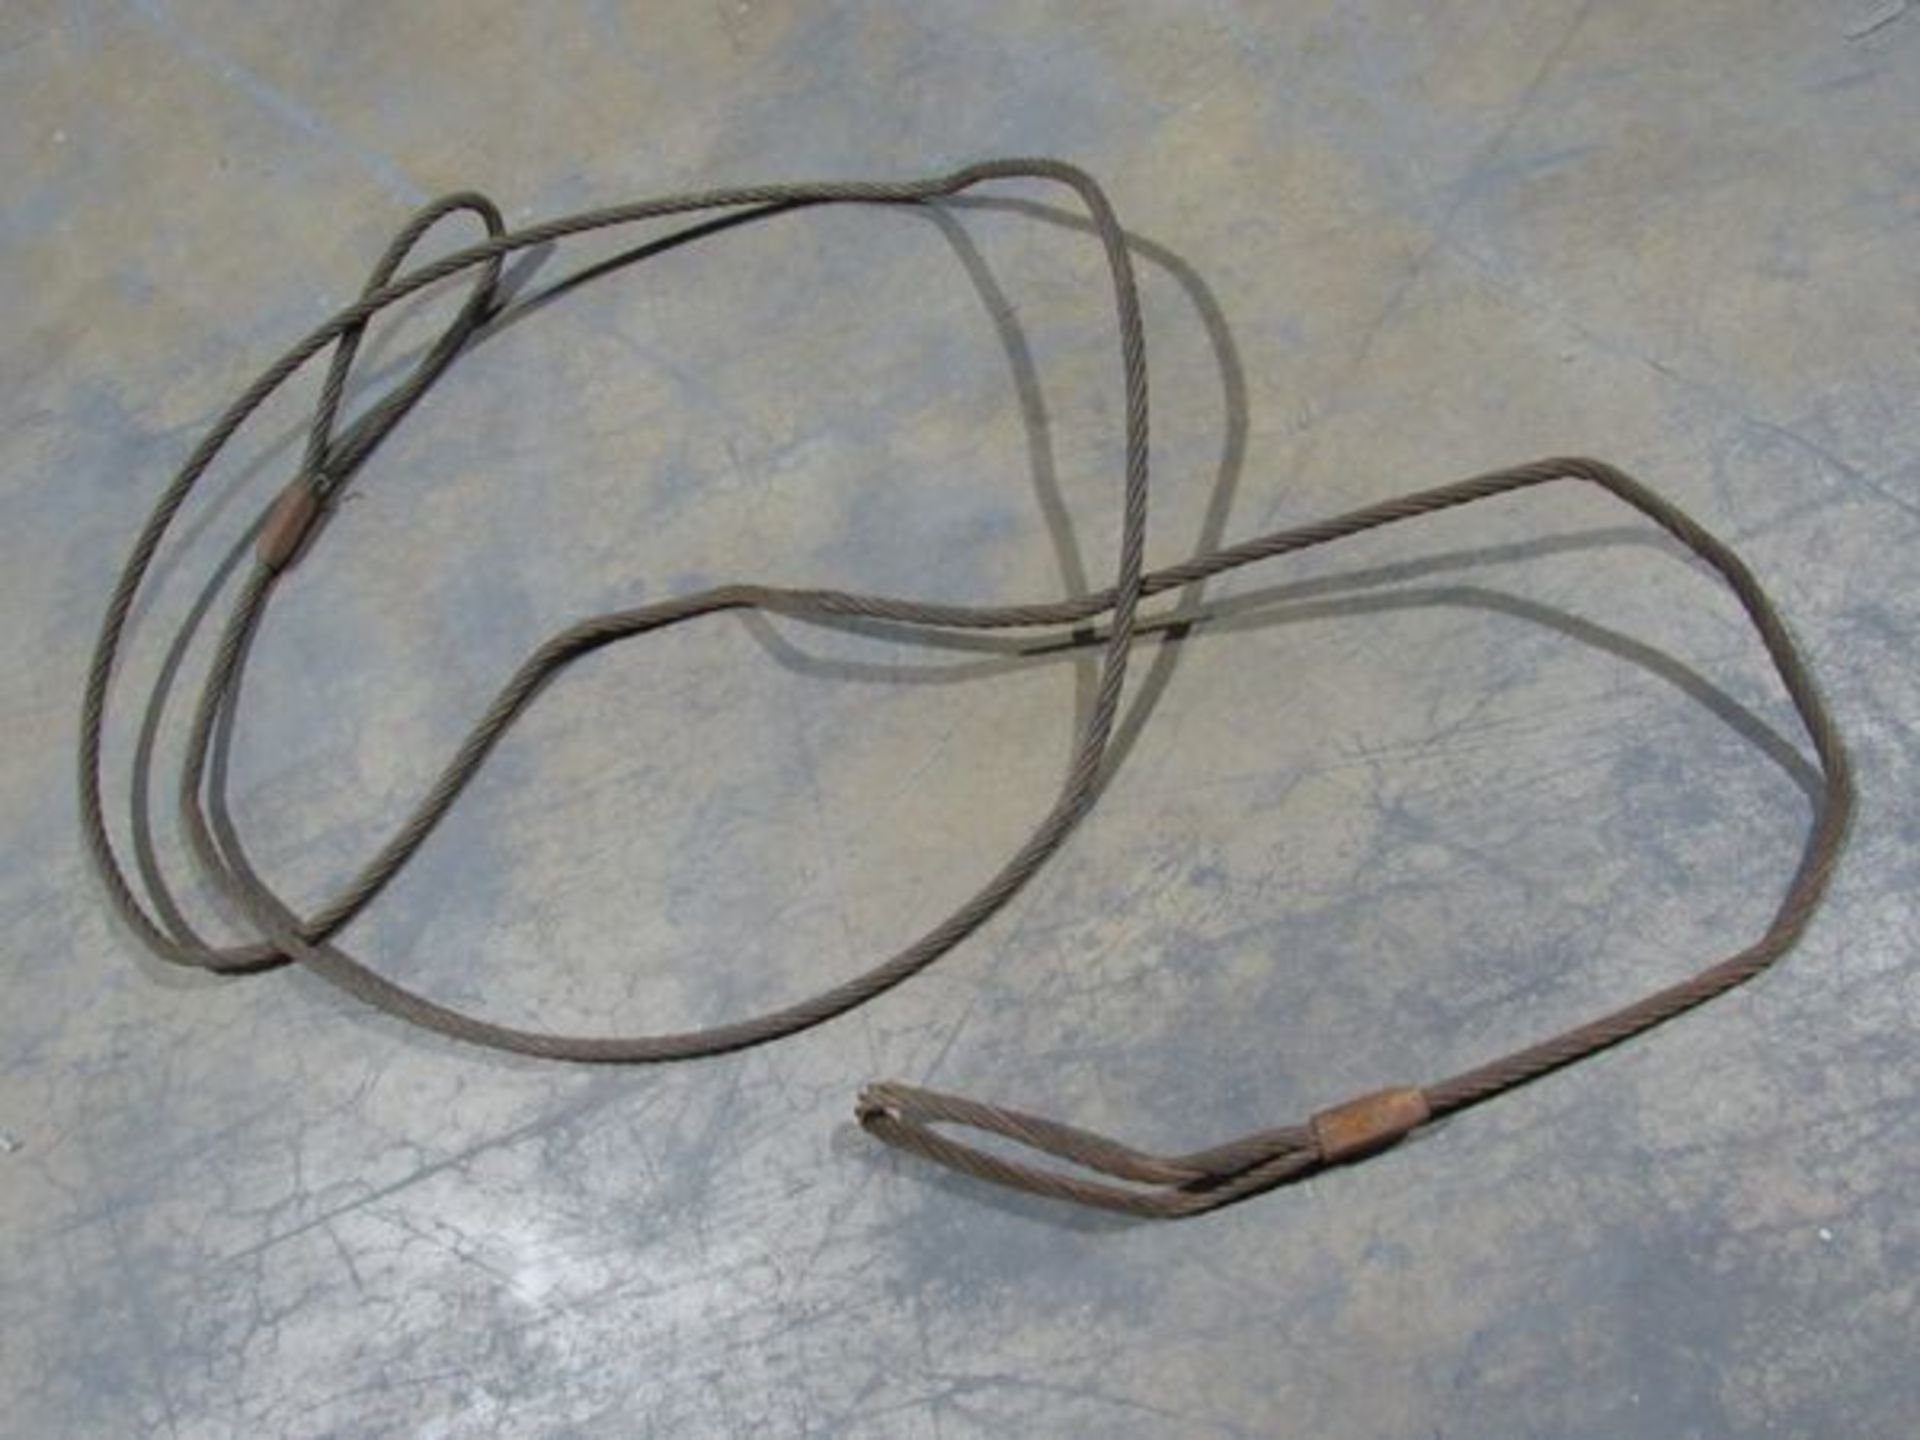 Assorted Braided Steel Lifting Slings- MFR - Total Tool, Lindi Sling Sizes Range From 3/8" to 1" - Image 4 of 20